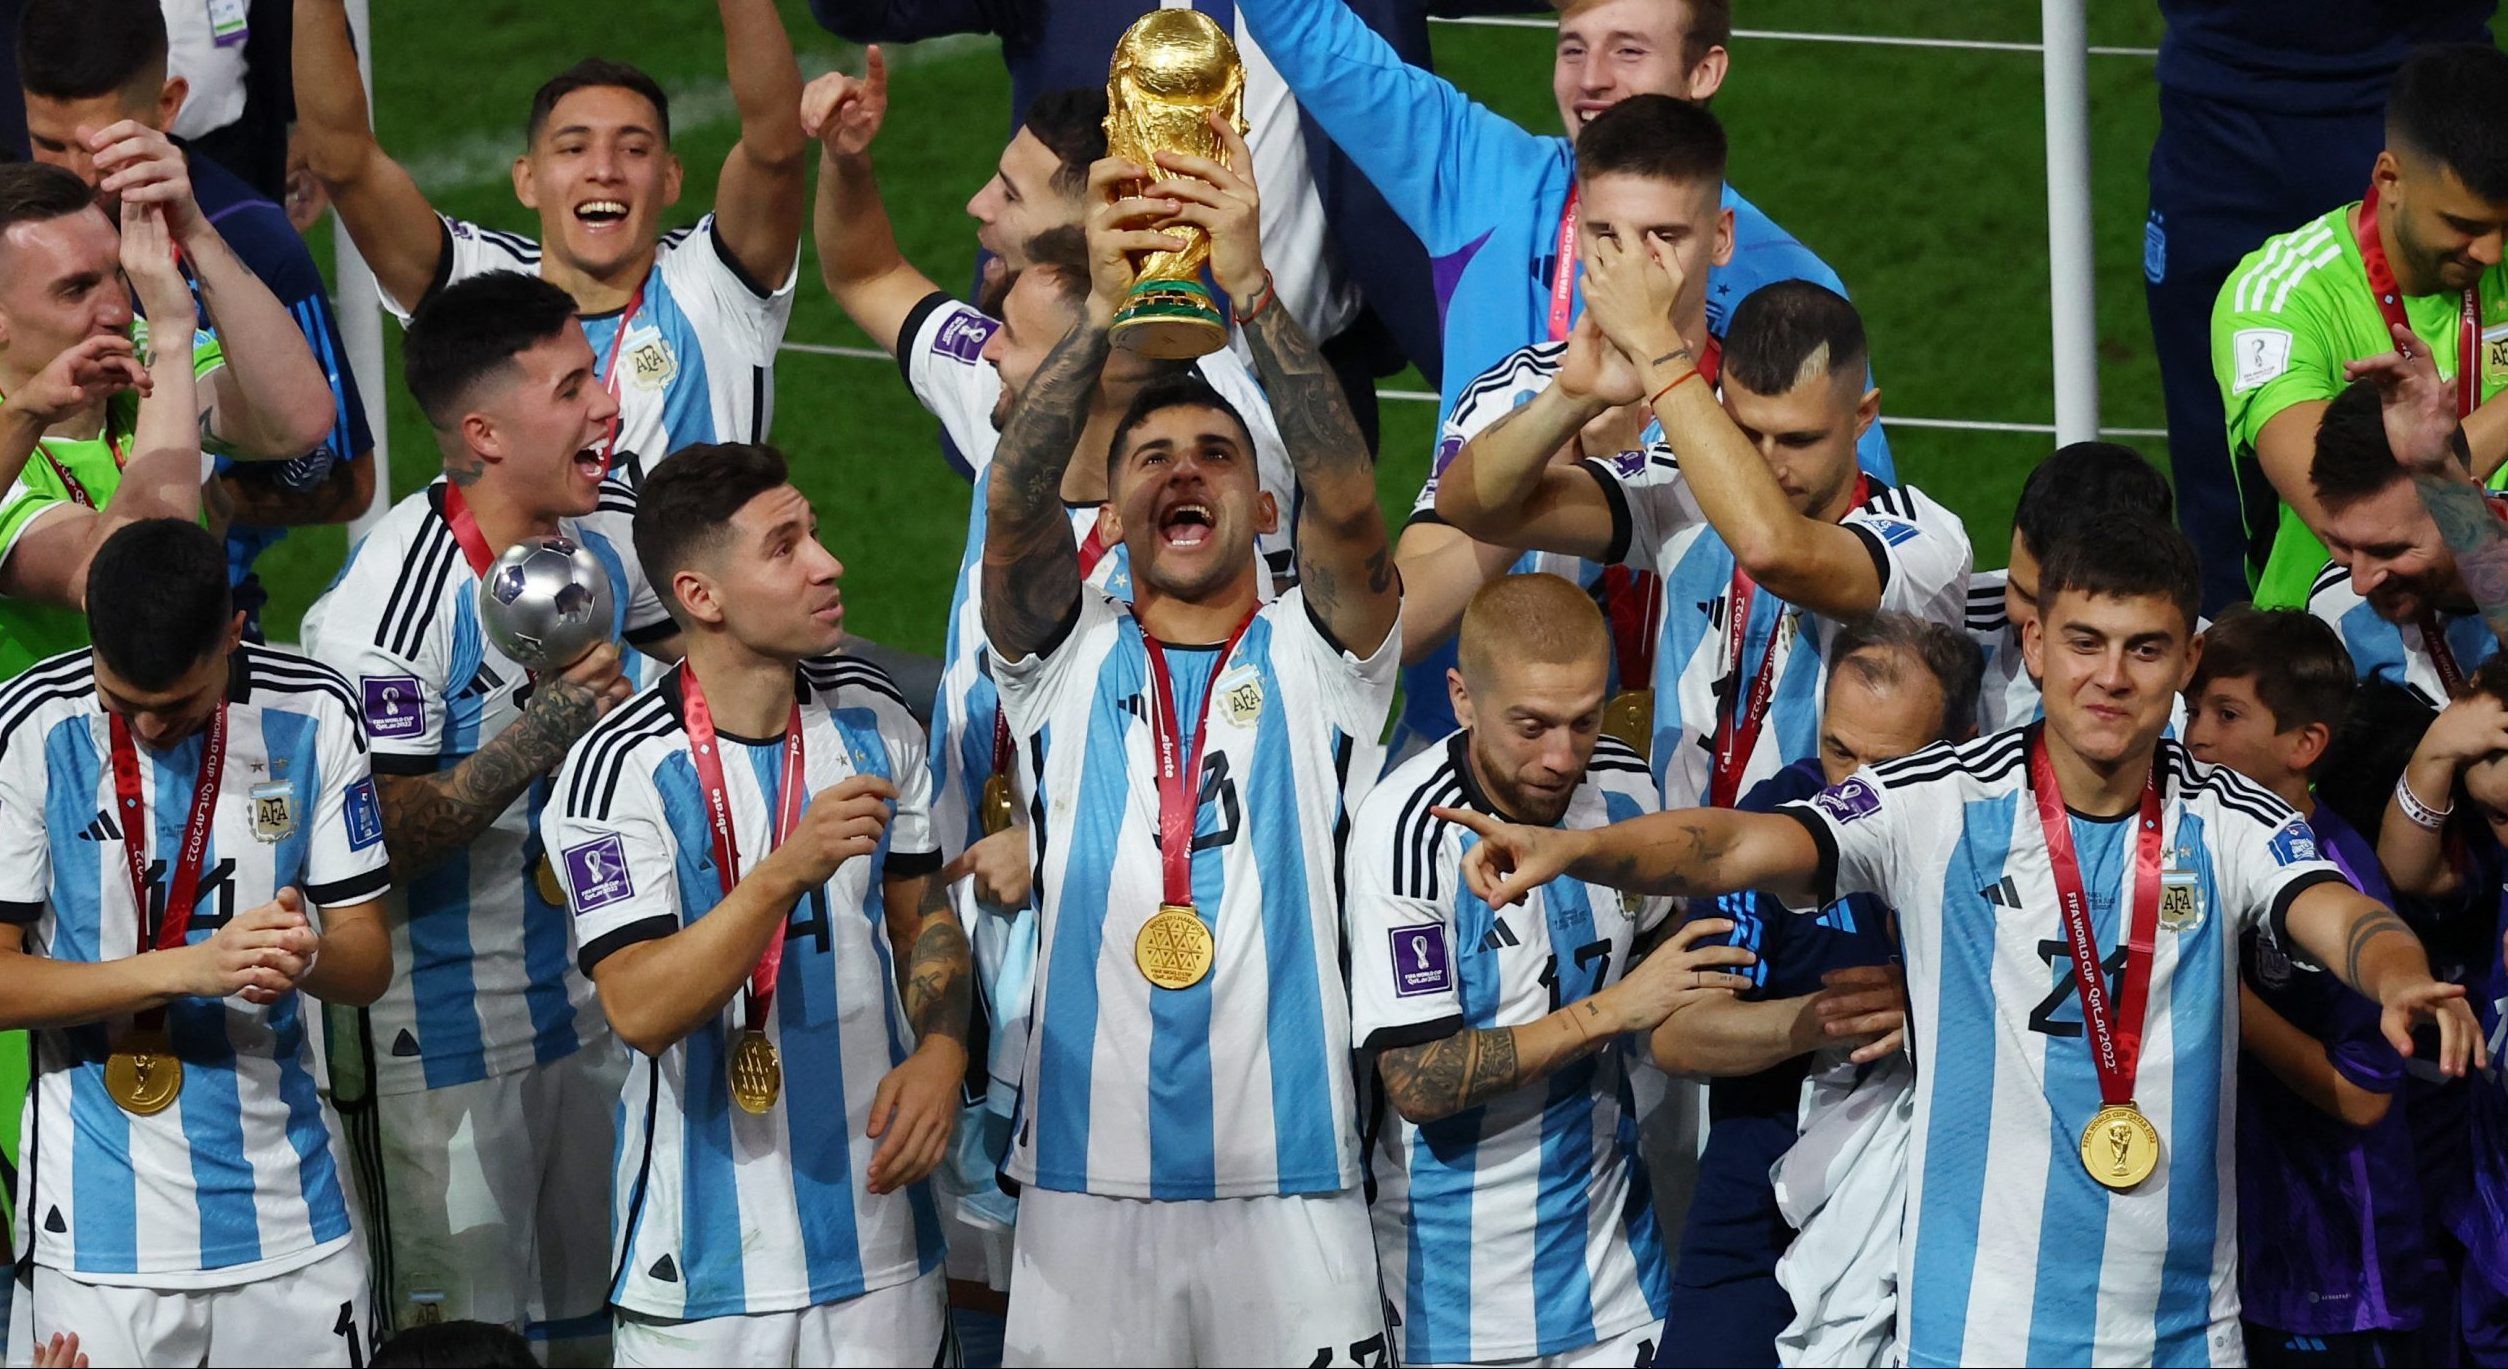 Soccer Football - FIFA World Cup Qatar 2022 - Final - Argentina v France - Lusail Stadium, Lusail, Qatar - December 18, 2022 Argentina's Cristian Romero celebrates with the trophy after winning the World Cup with teammates REUTERS/Paul Childs